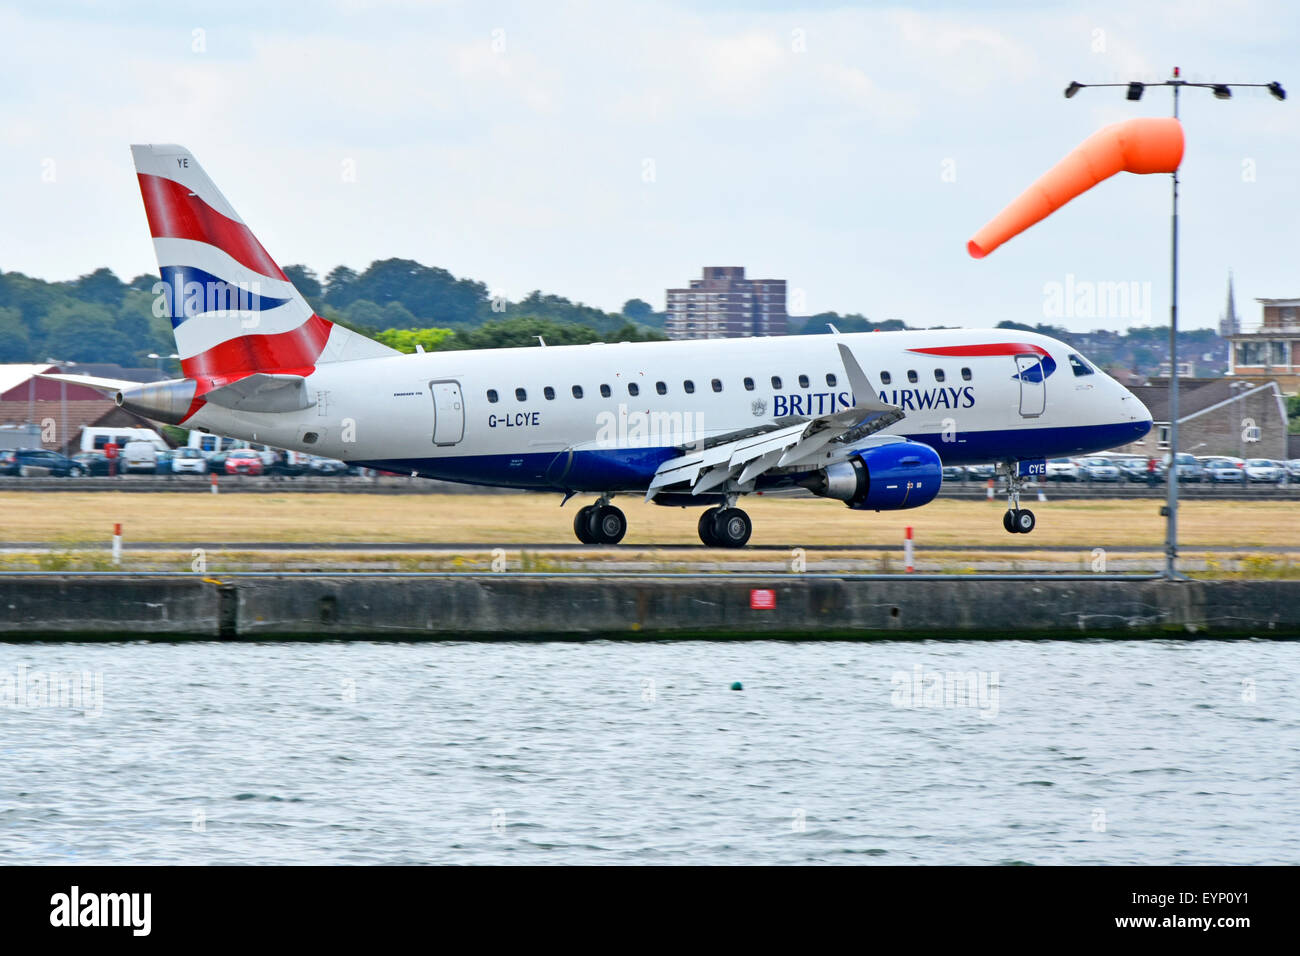 British Airways Cityflyer Embraer 170 G-LCYE plane landing at London City Airport with windsock London Docklands Newham East London England UK Stock Photo